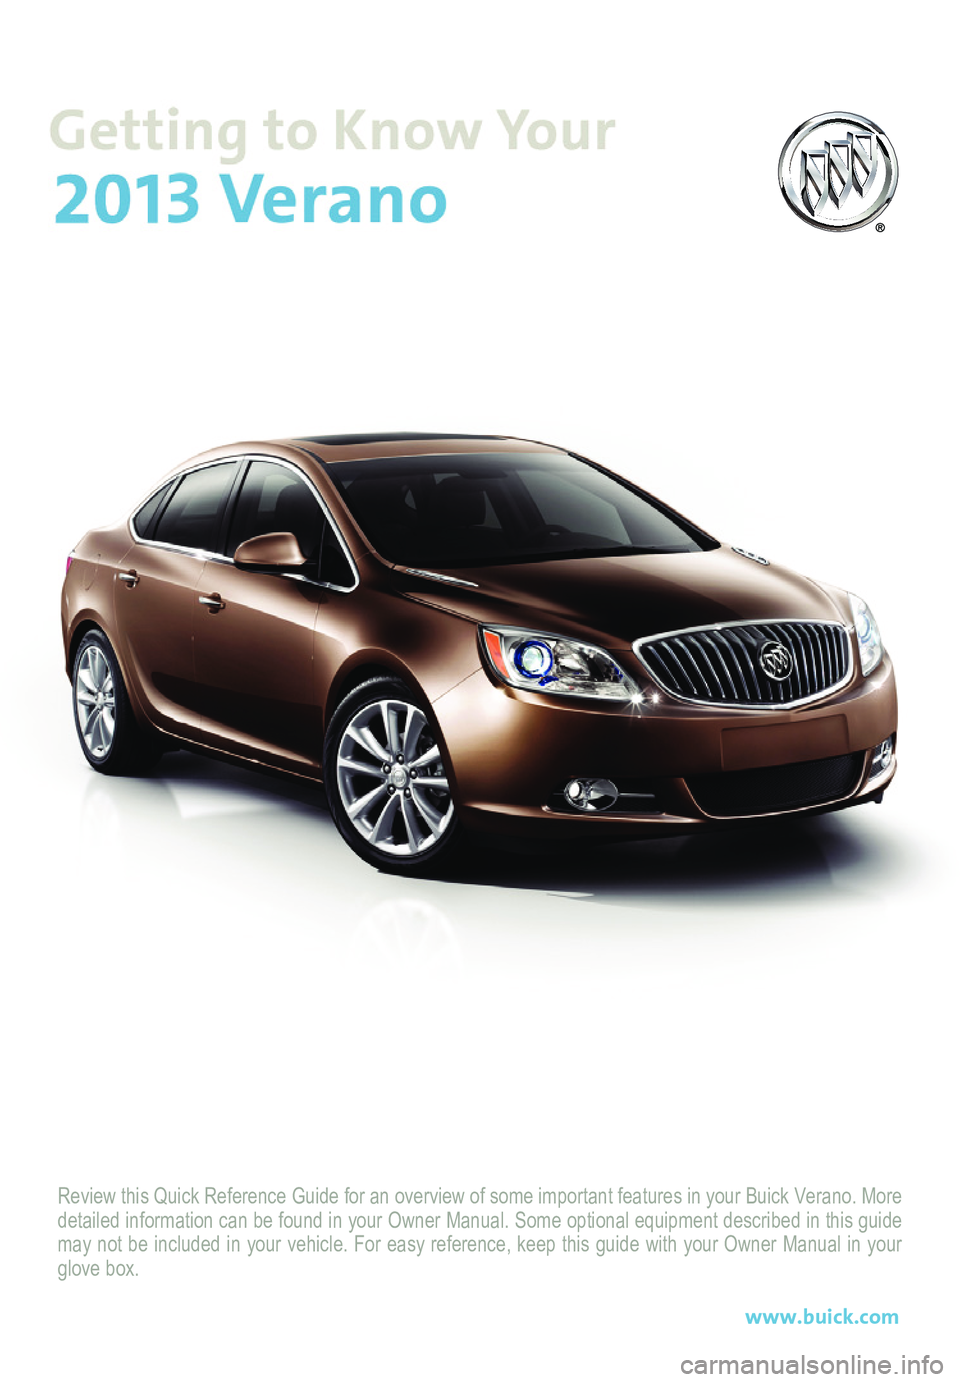 BUICK VERANO 2013  Get To Know Guide Review this Quick Reference Guide for an overview of some important feat\
ures in your Buick Verano. More detailed information can be found in your Owner Manual. Some optional eq\
uipment described in